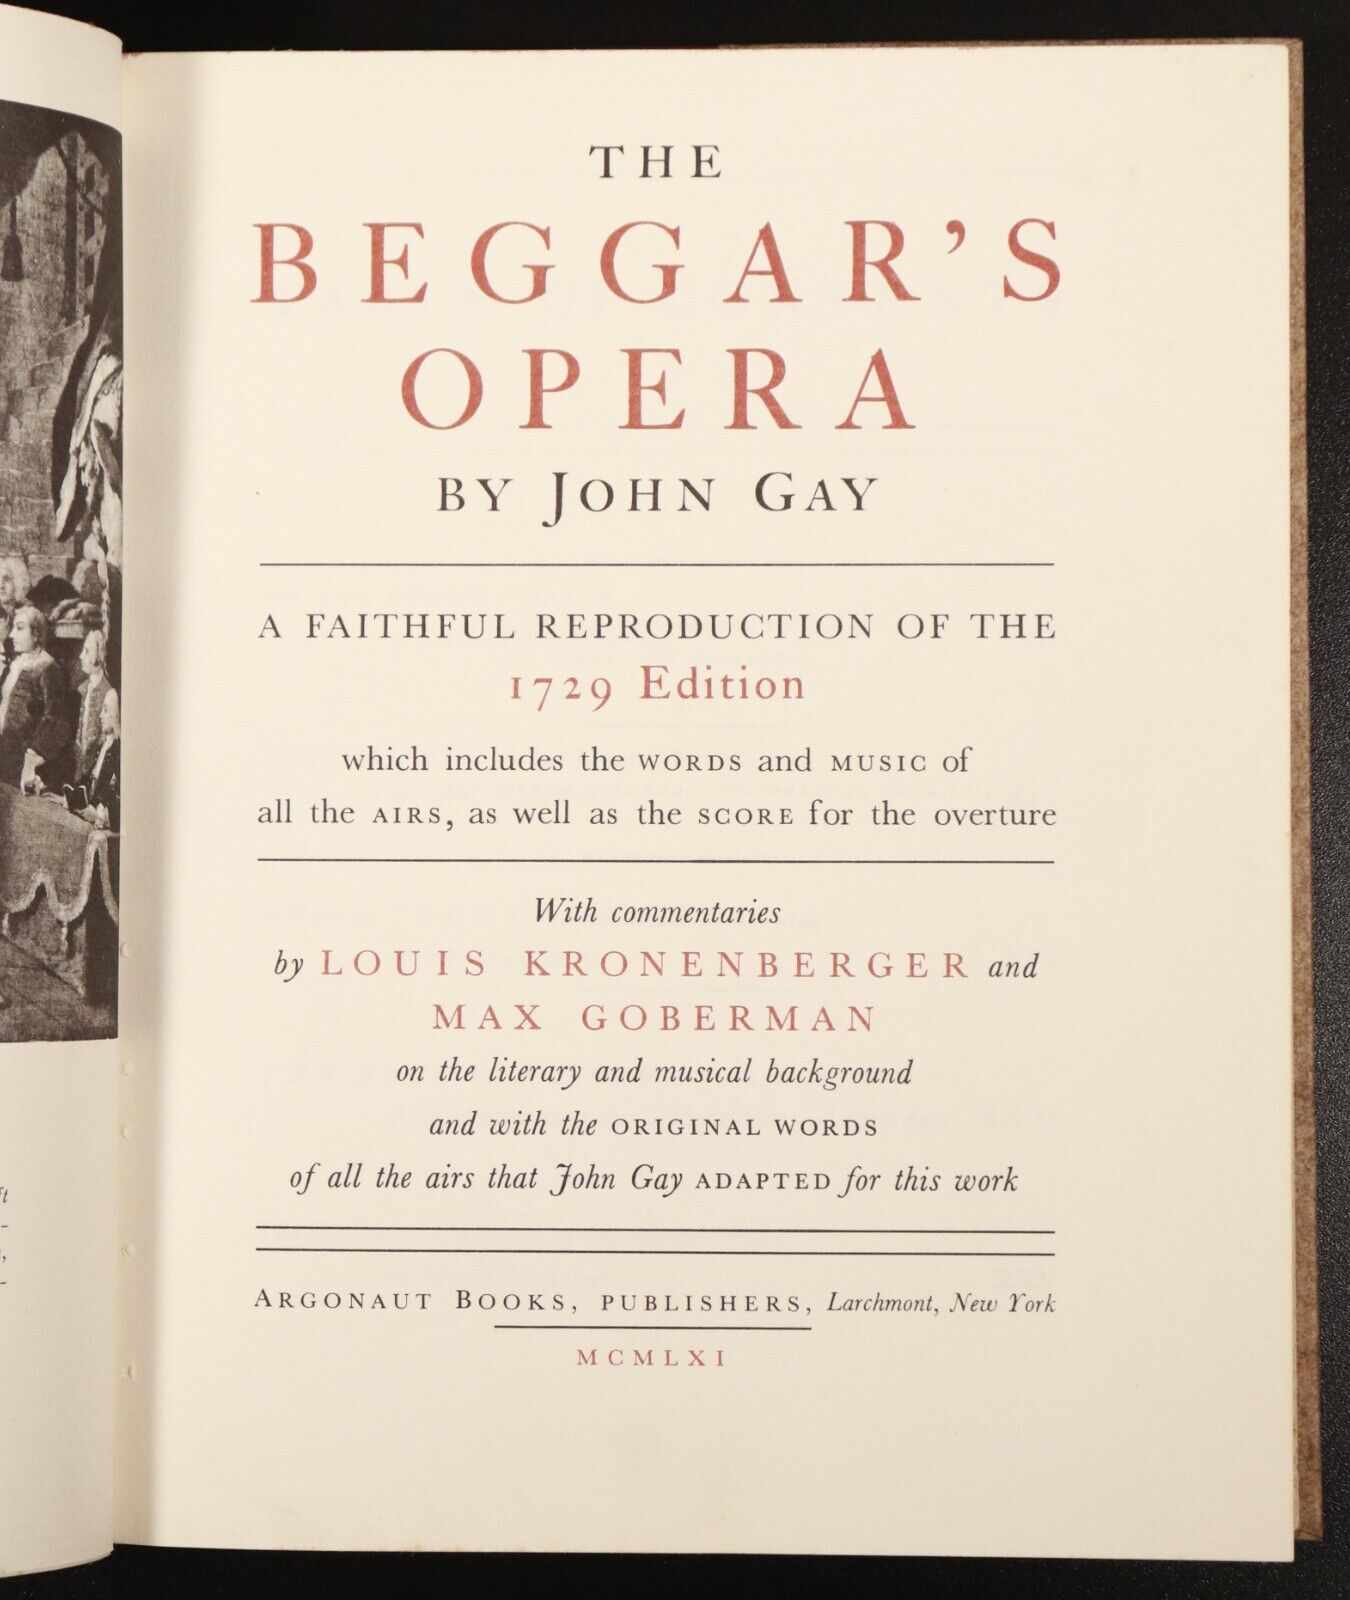 1961 The Beggars Opera by John Gay 1729 Edition Reprint Vintage Theatre Book - 0